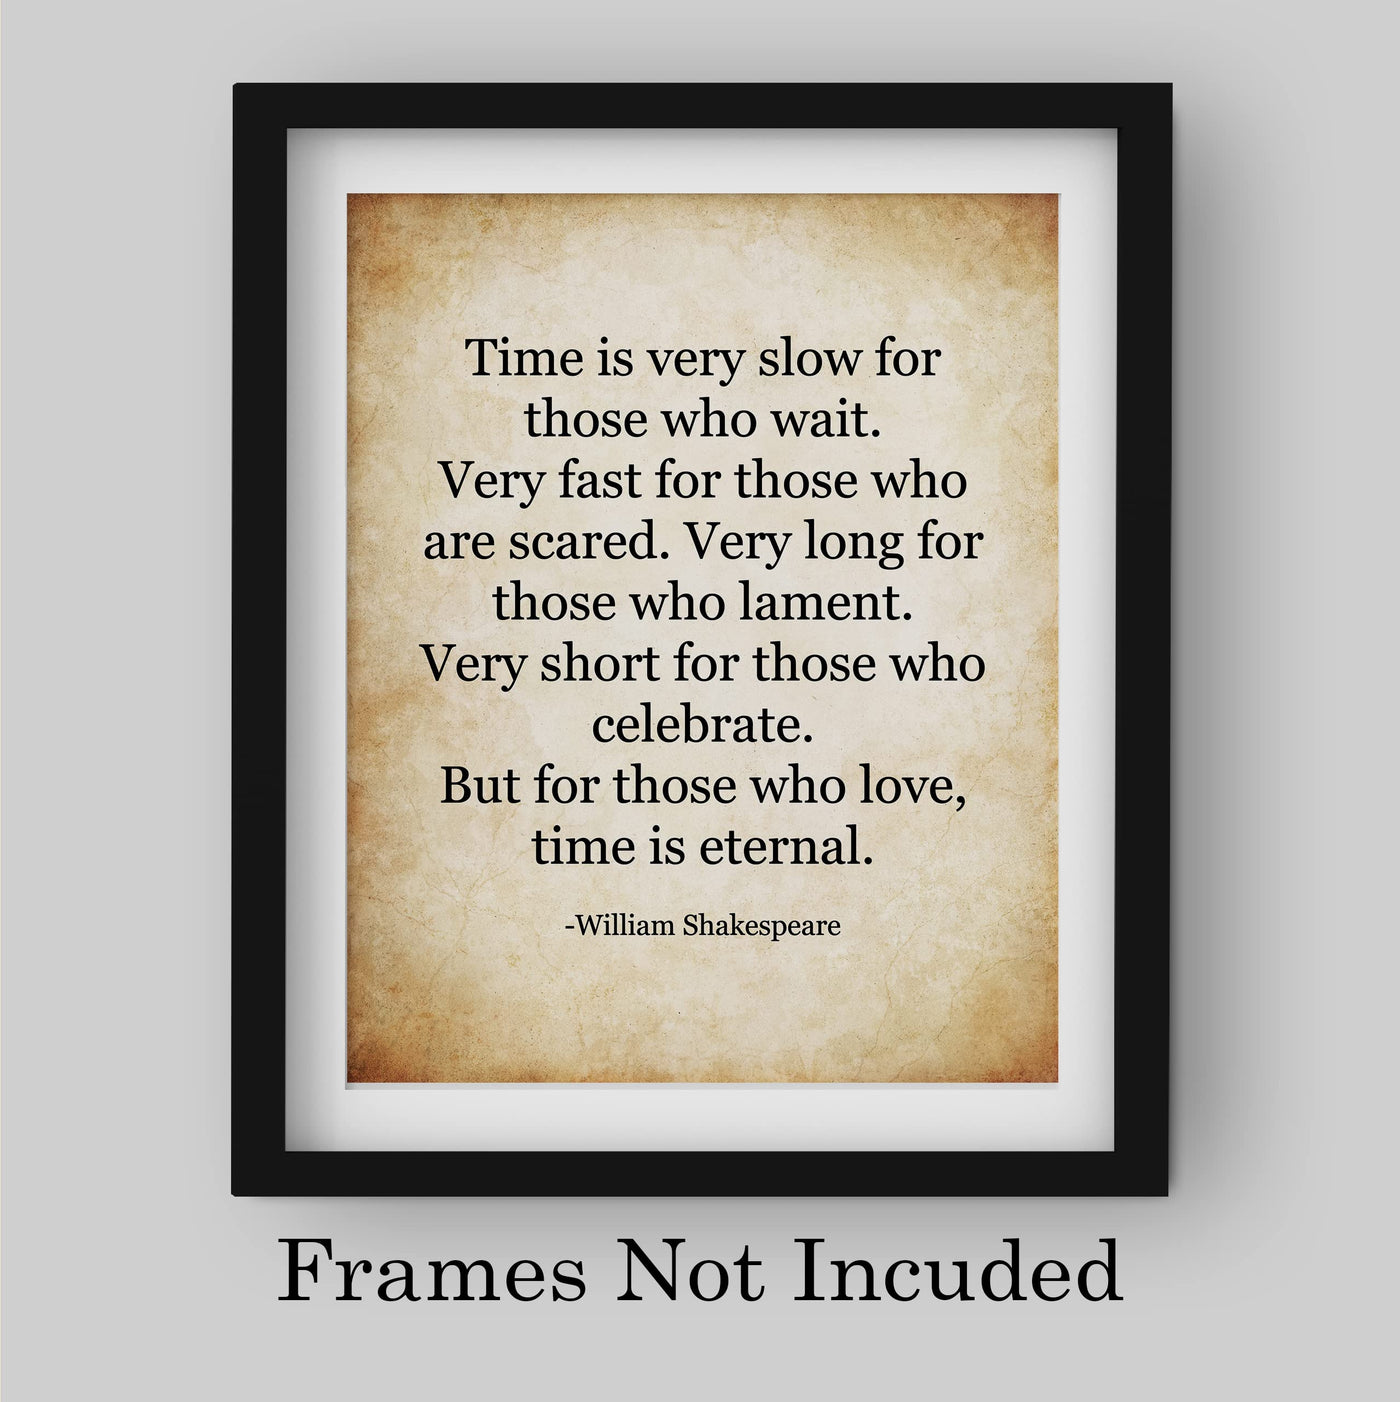 William Shakespeare-"For Those Who Love, Time Is Eternal" Famous Quotes -8 x 10" Inspirational Literary Wall Art. Vintage Poetry Print -Ready to Frame. Perfect Home-Office-Studio-Library Decor!